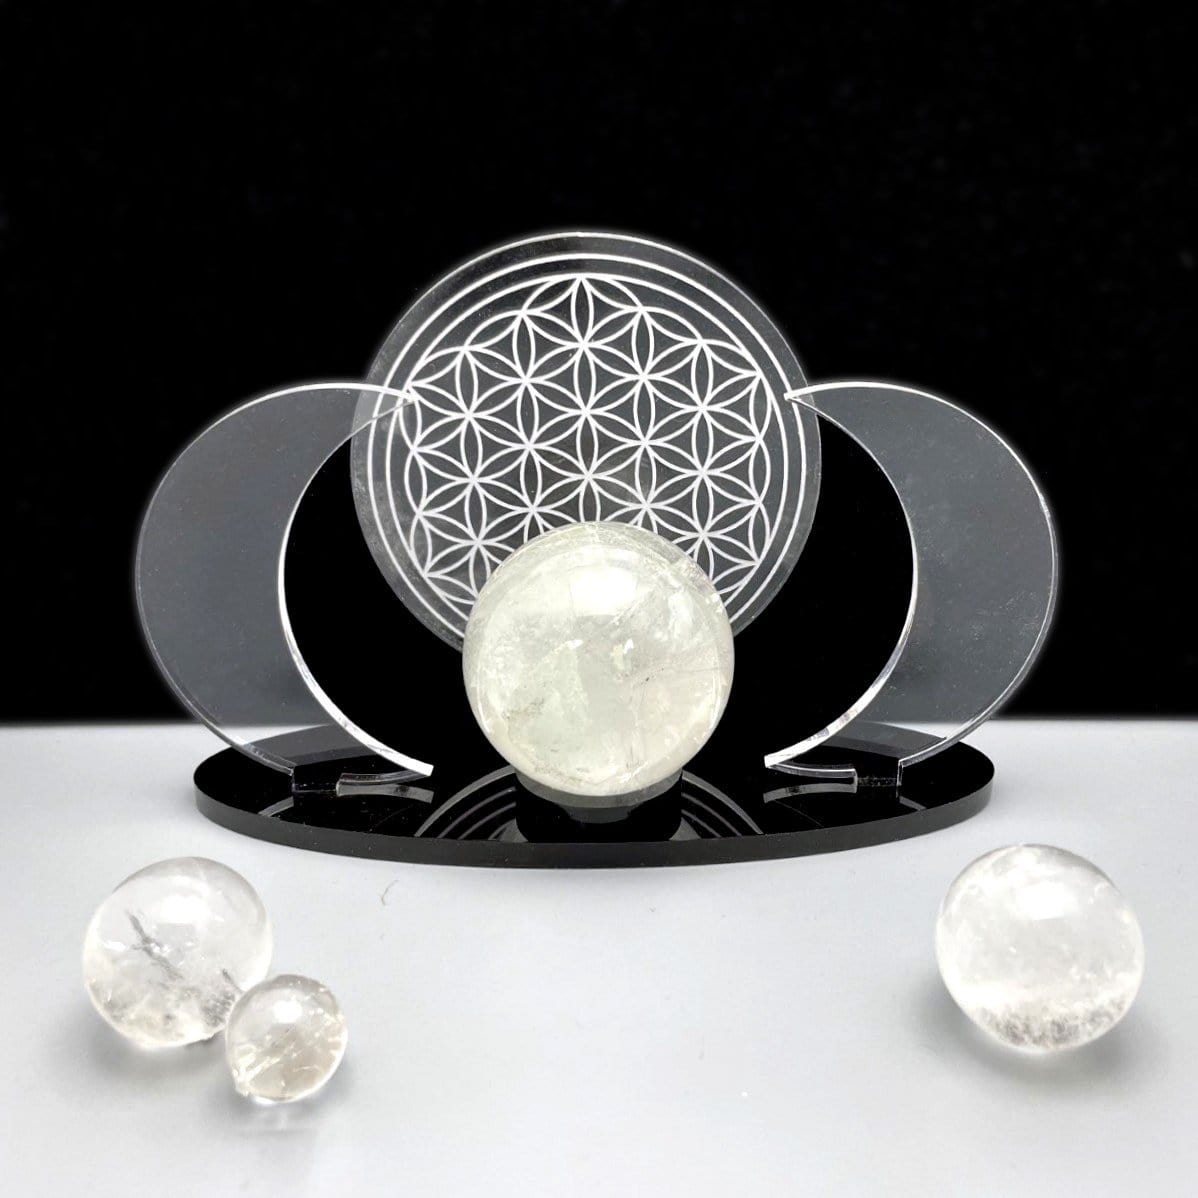 A front view of an Acrylic Sphere Holder Crescent Moons with Flower of Life holding a sphere. Surround spheres are for display.